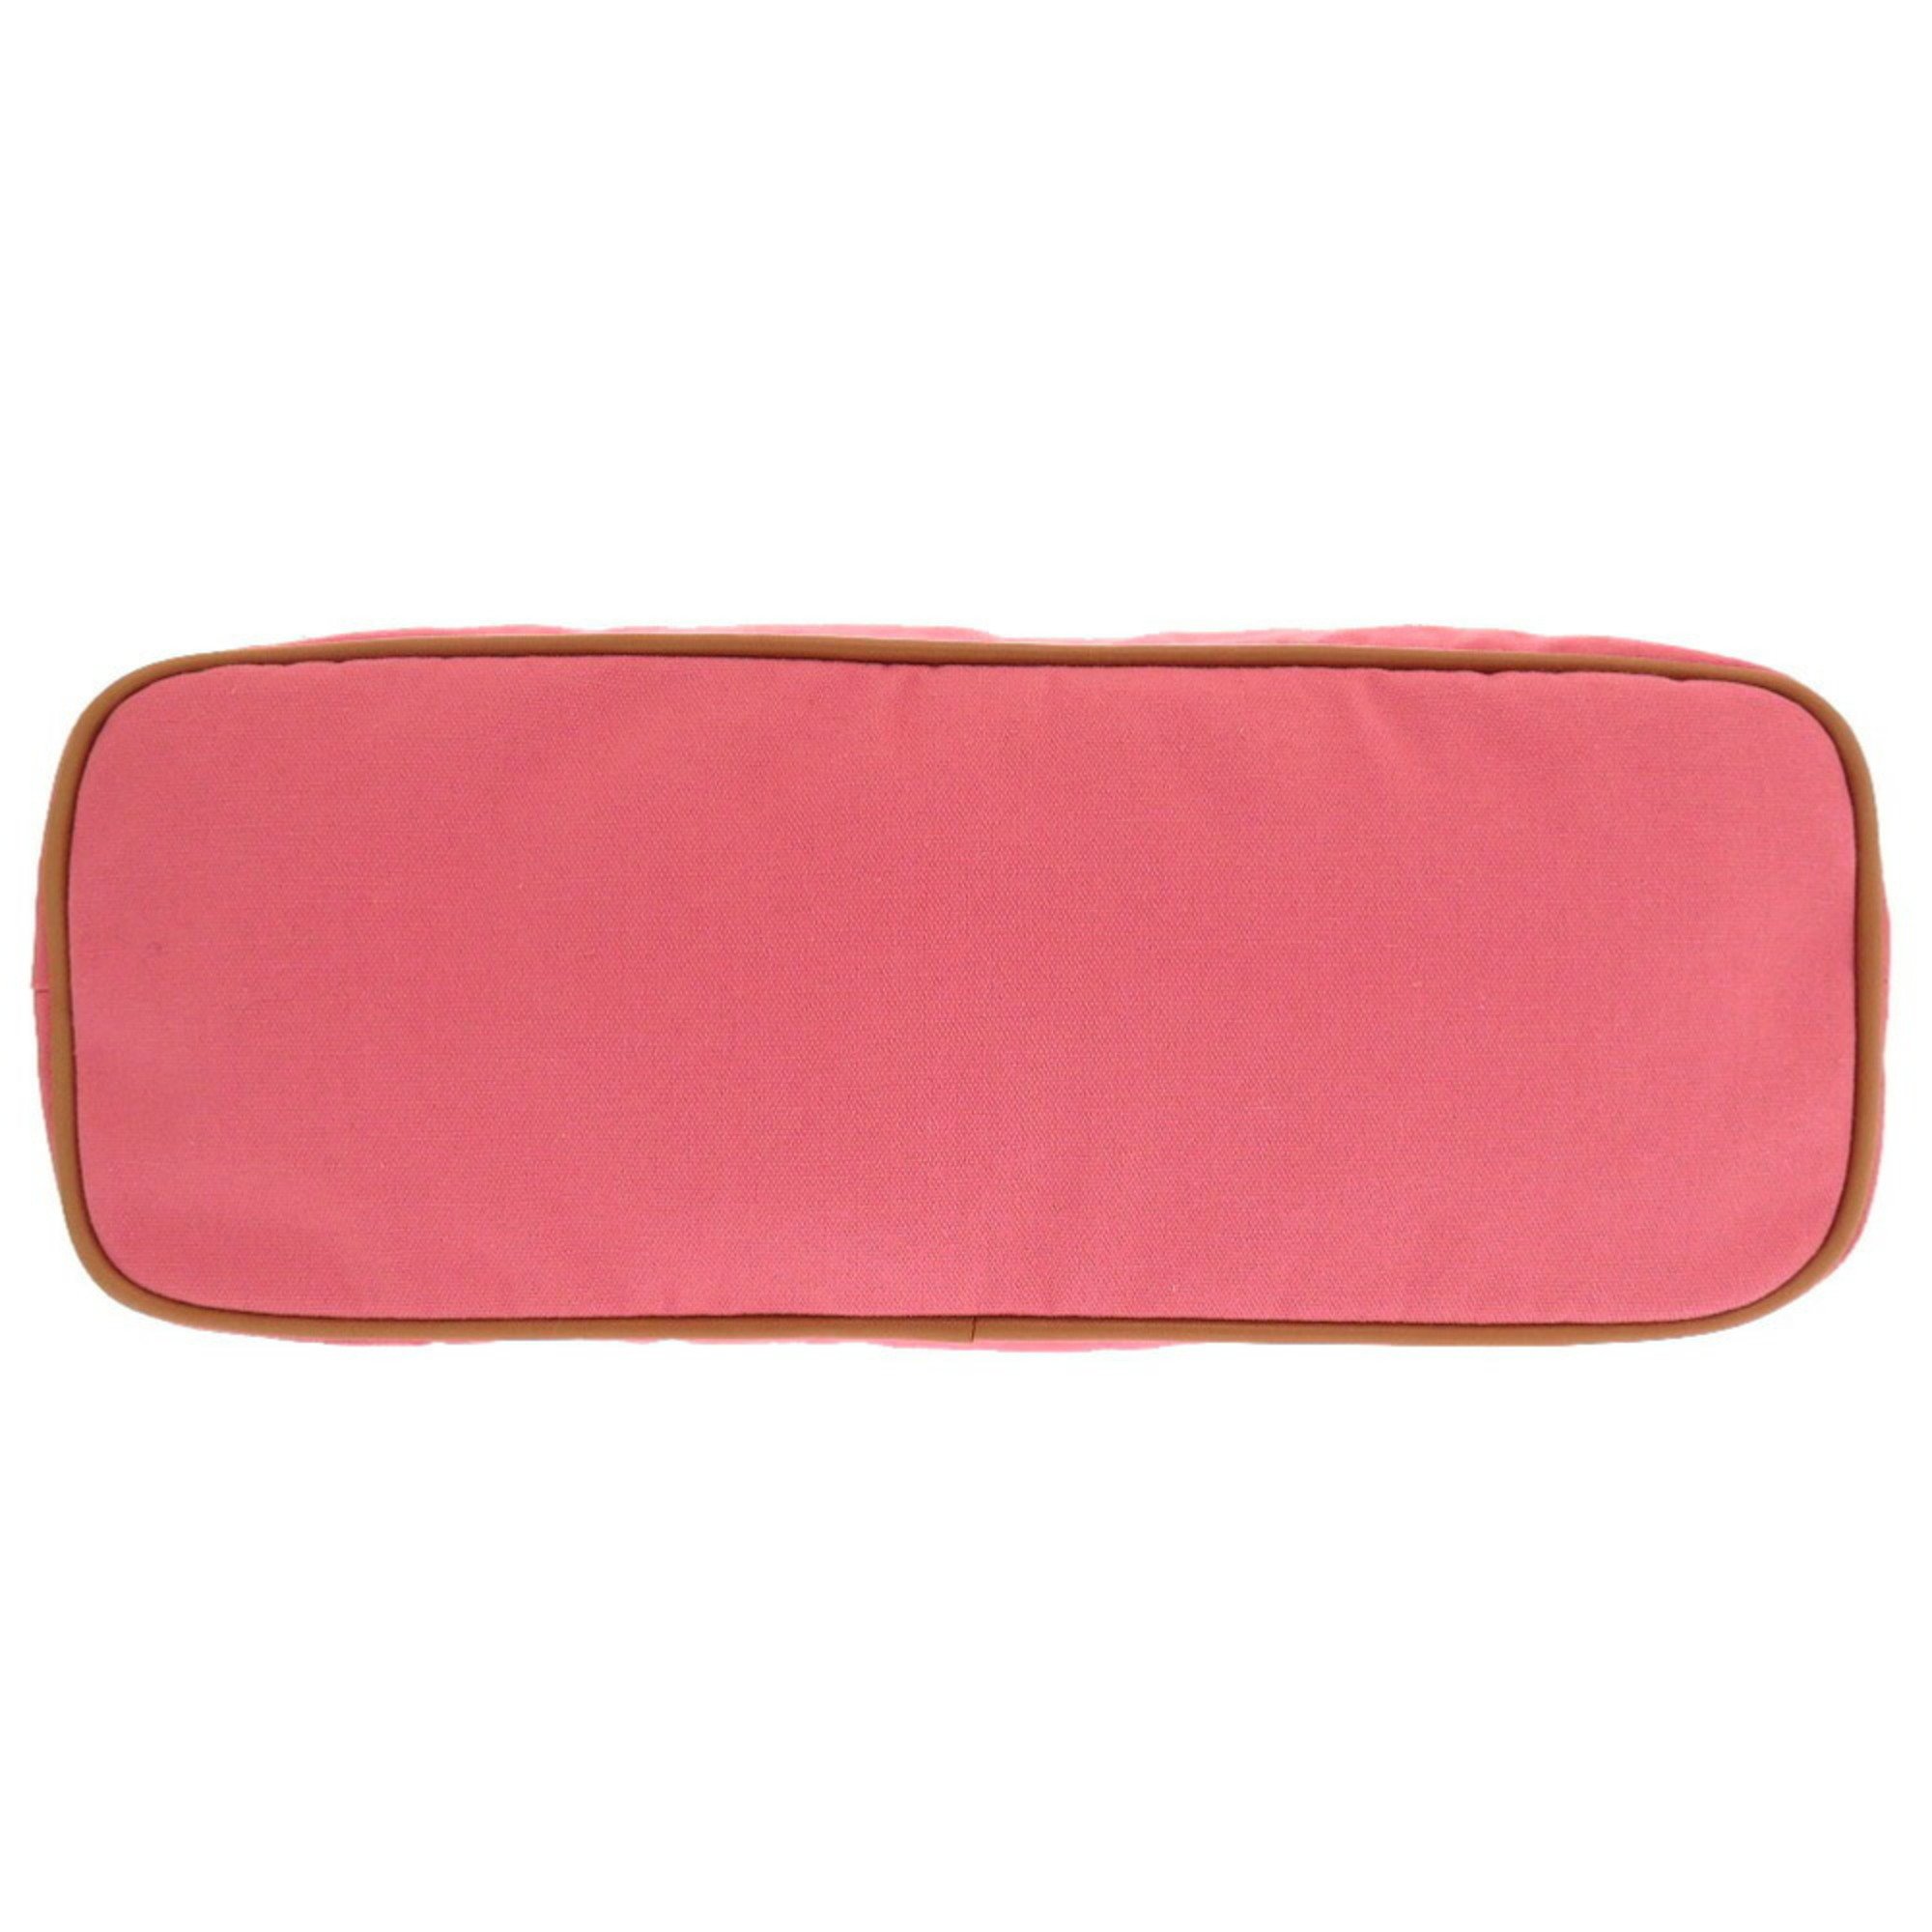 Hermes Bolide Pouch TGM 34 Canvas Pink 0234 HERMES